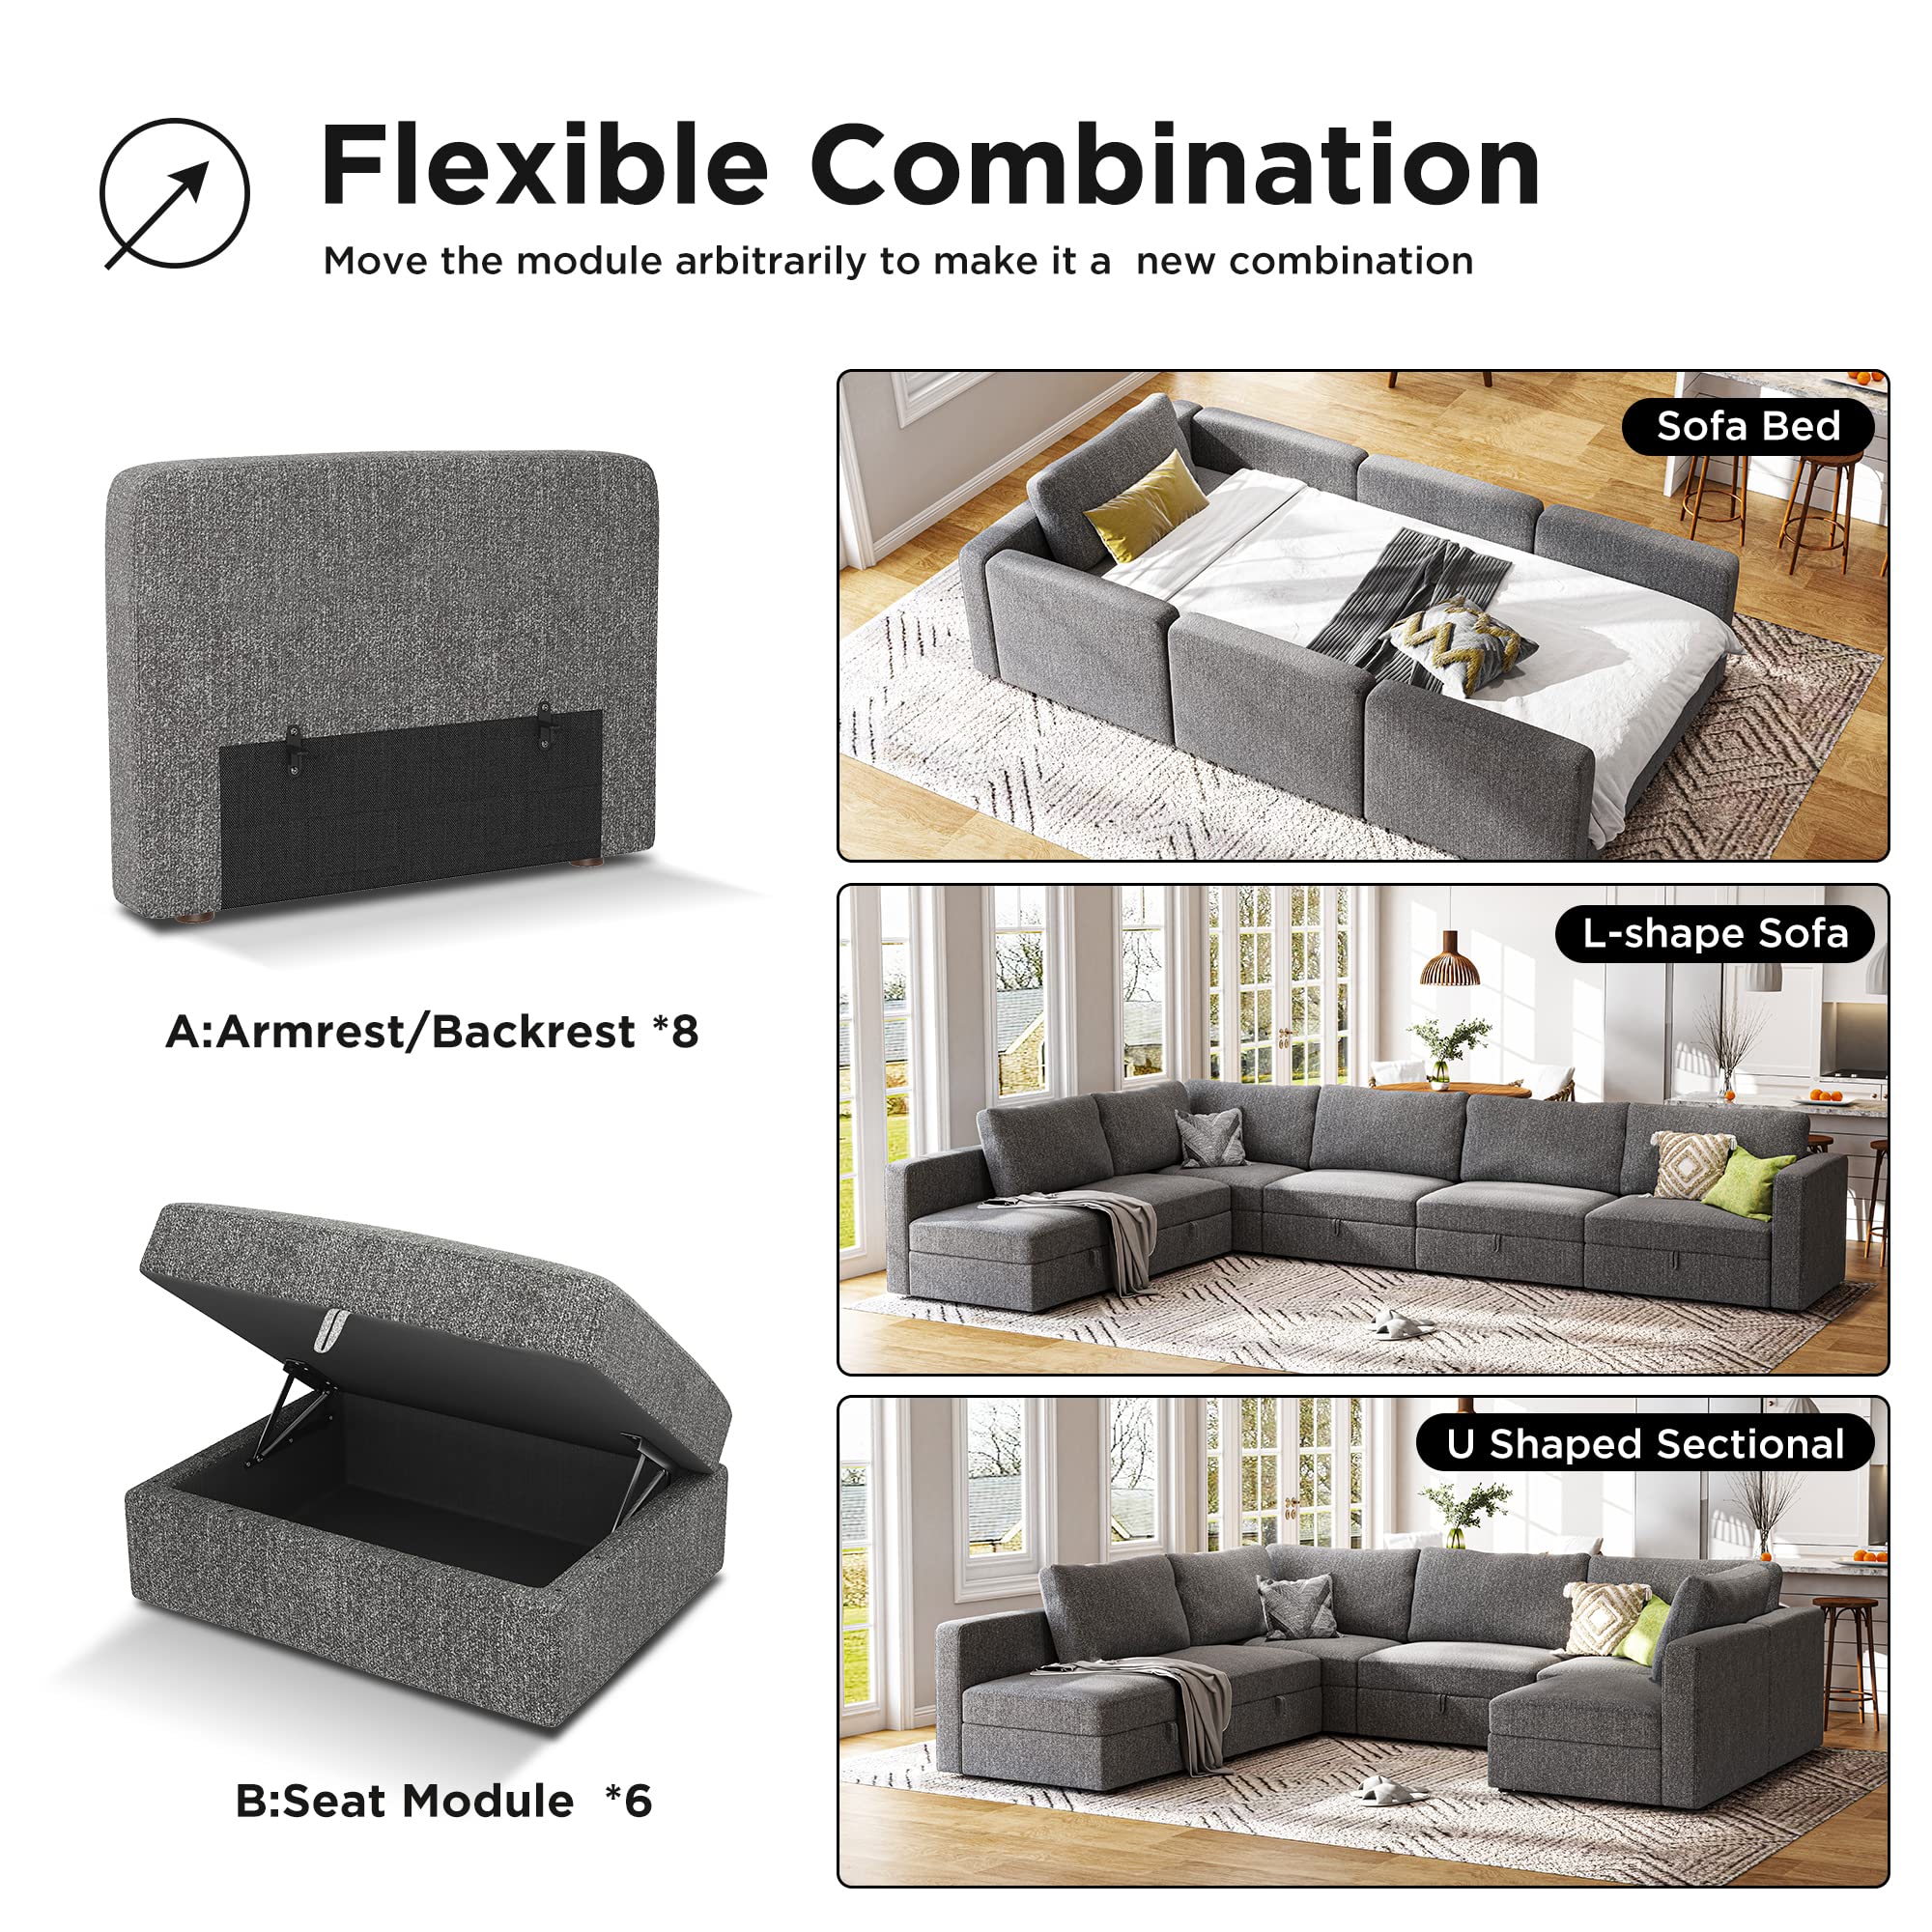 HONBAY Oversized Modular Sectional Sofa Reversible U Shaped Sectional Couch with Wide Chaise Modular Sofa with Storage Seat, Light Grey